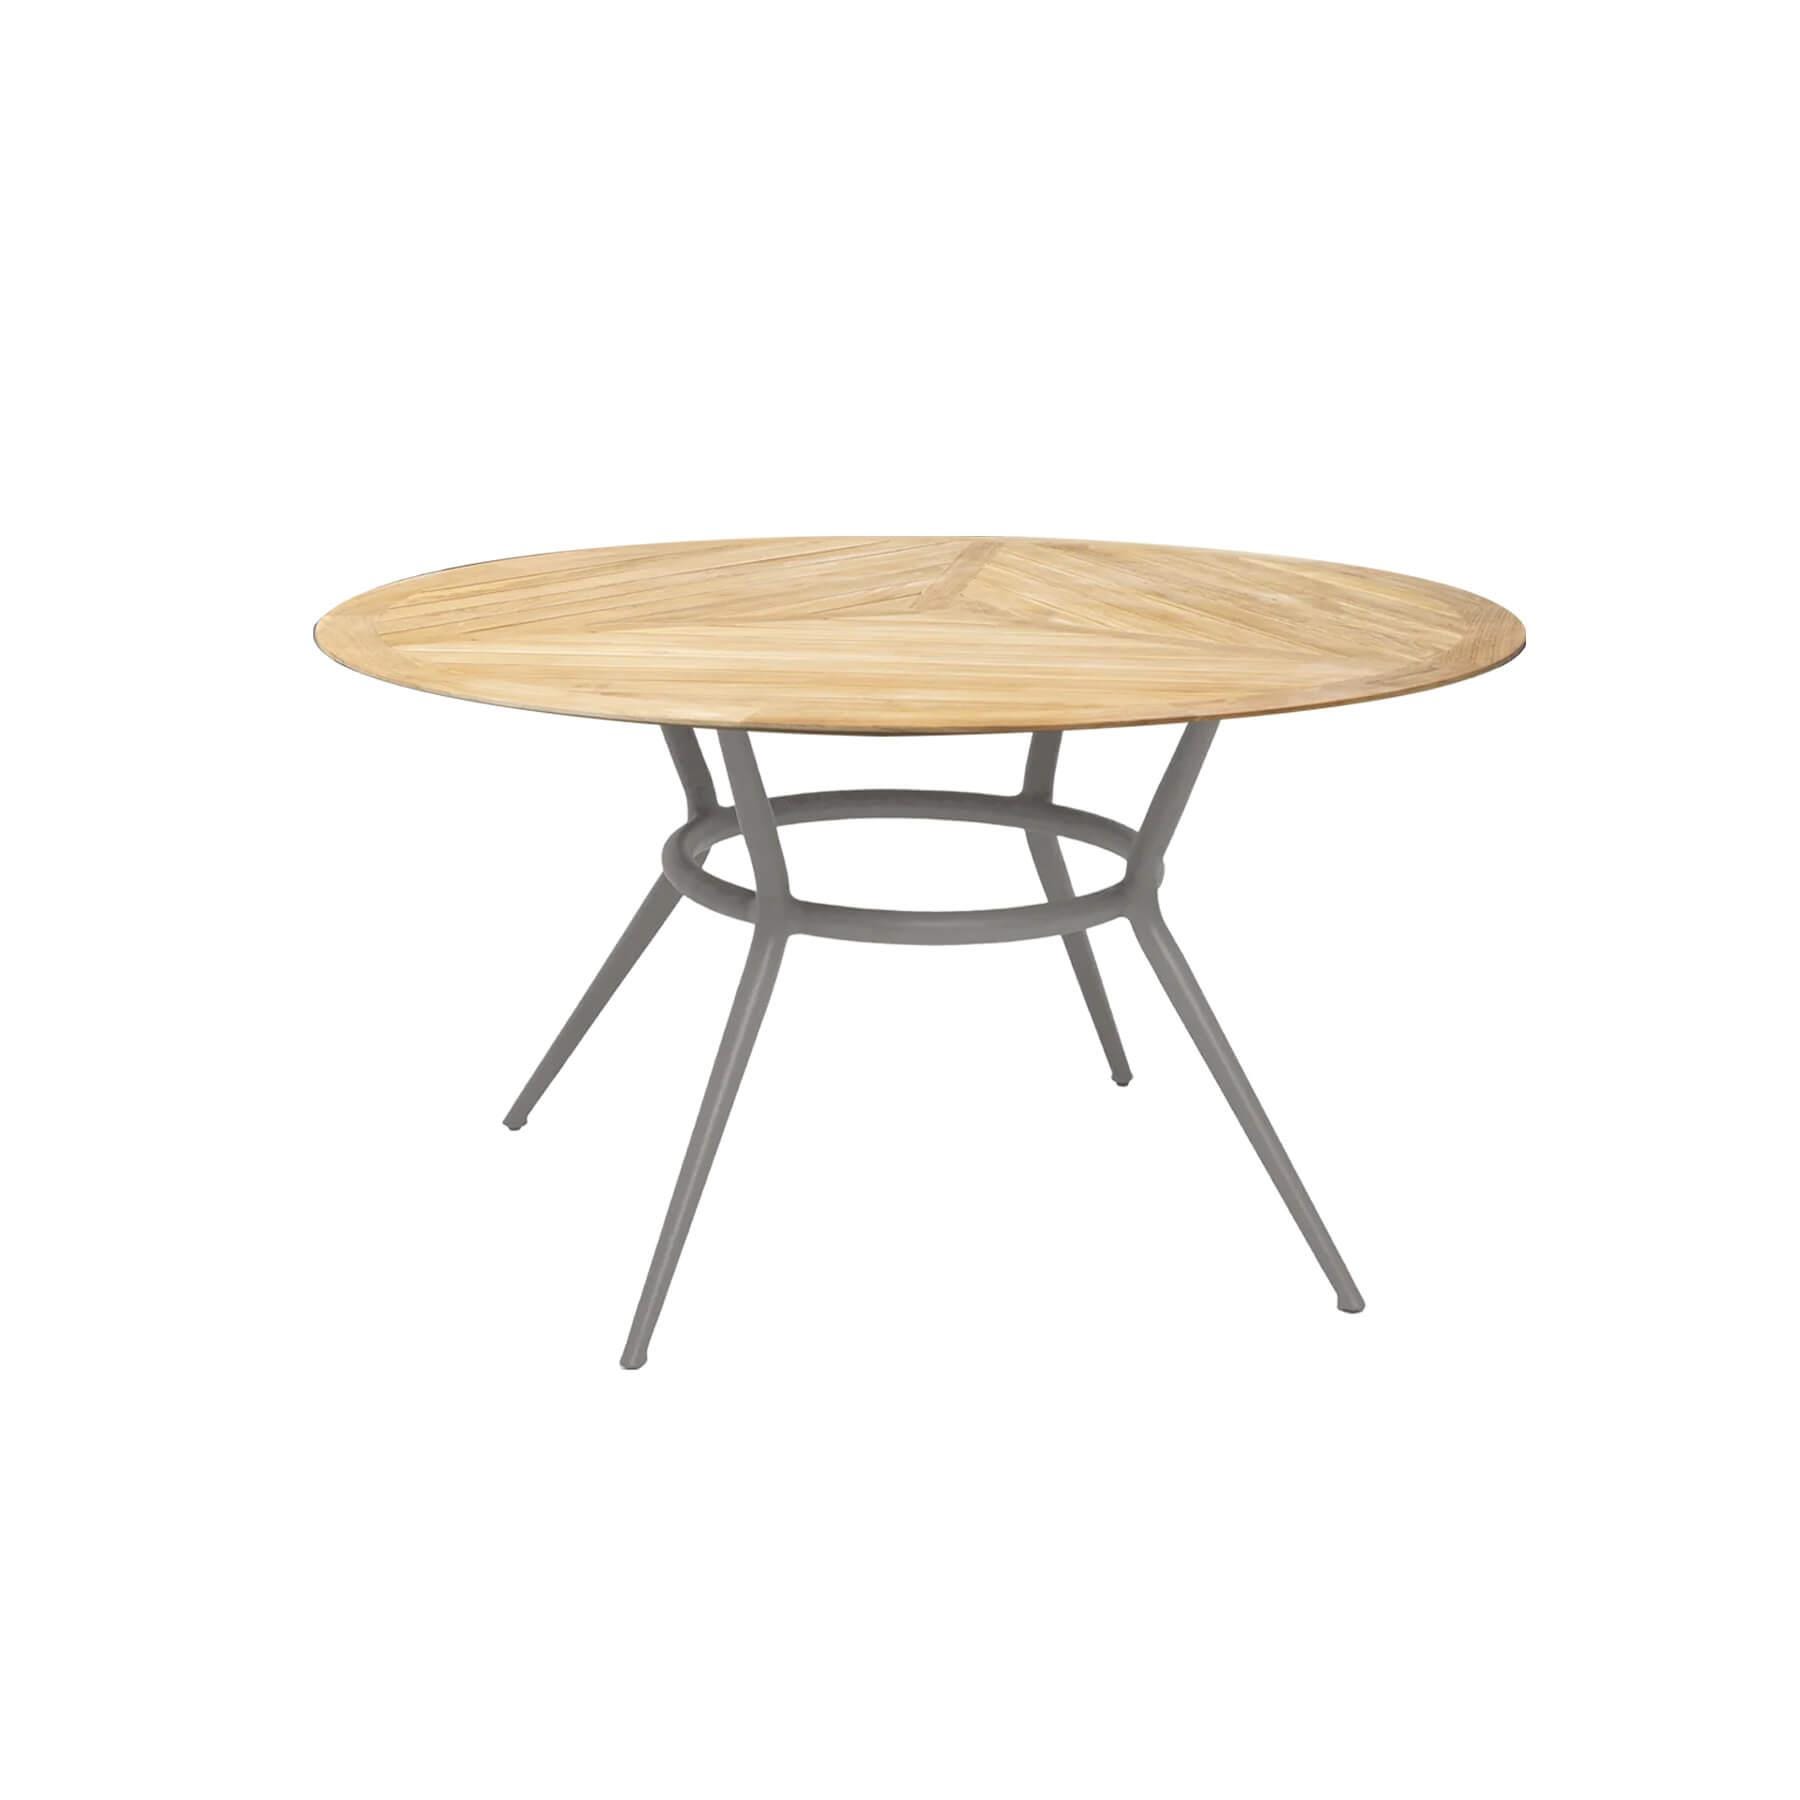 Caneline Joy Outdoor Dining Table Round Small Teak Top Taupe Legs Light Wood